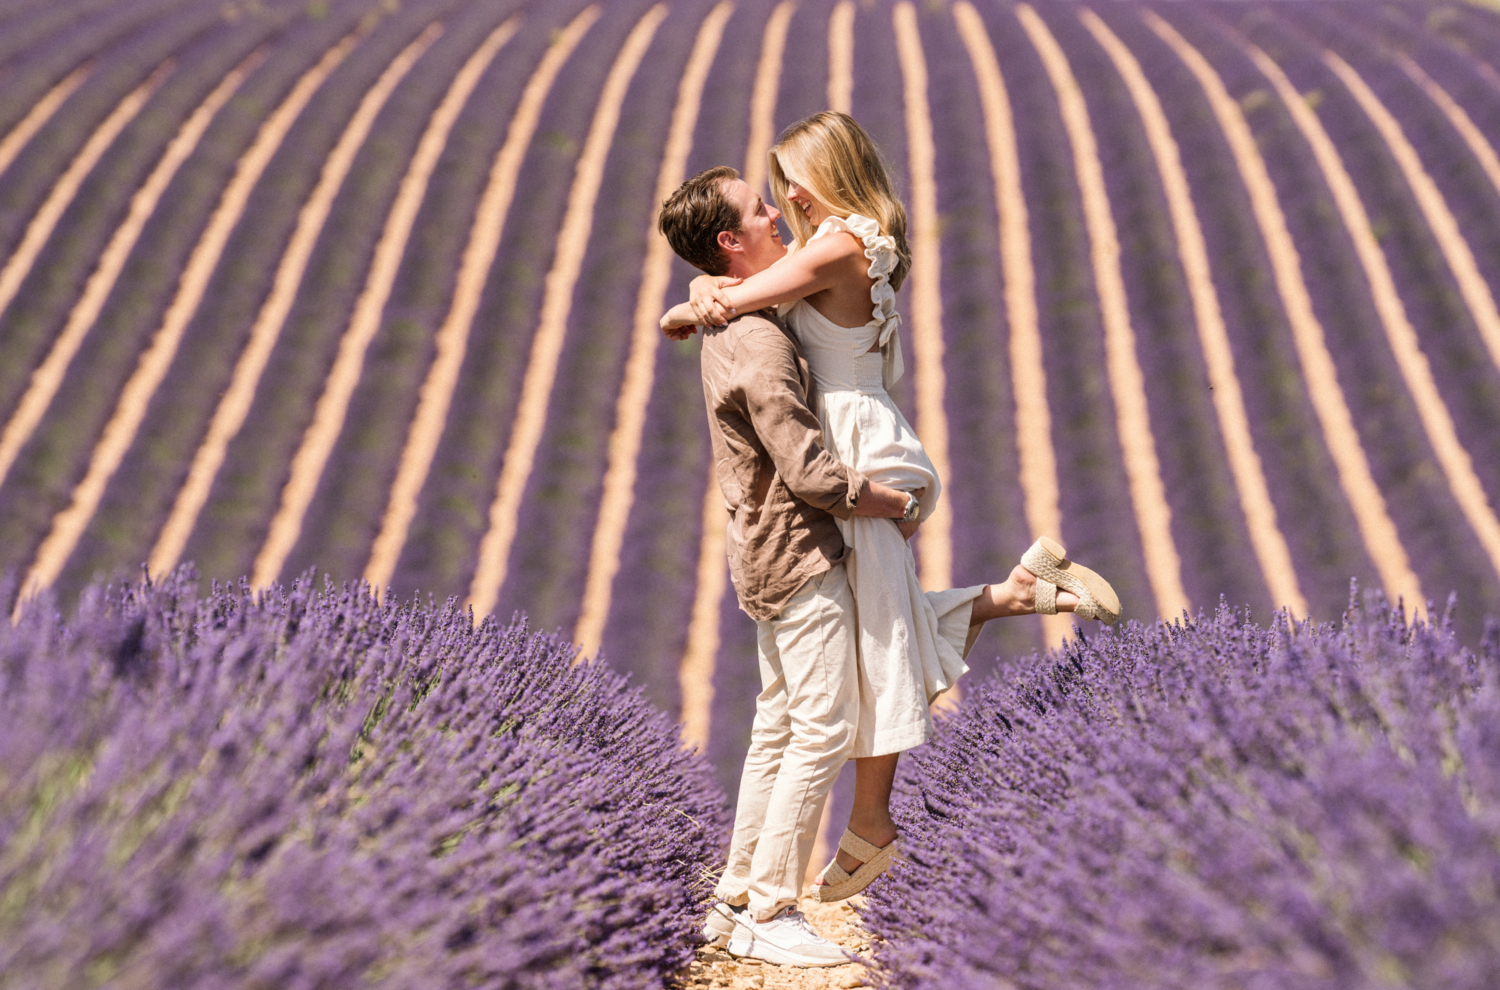 man lifts woman in air in lavender field